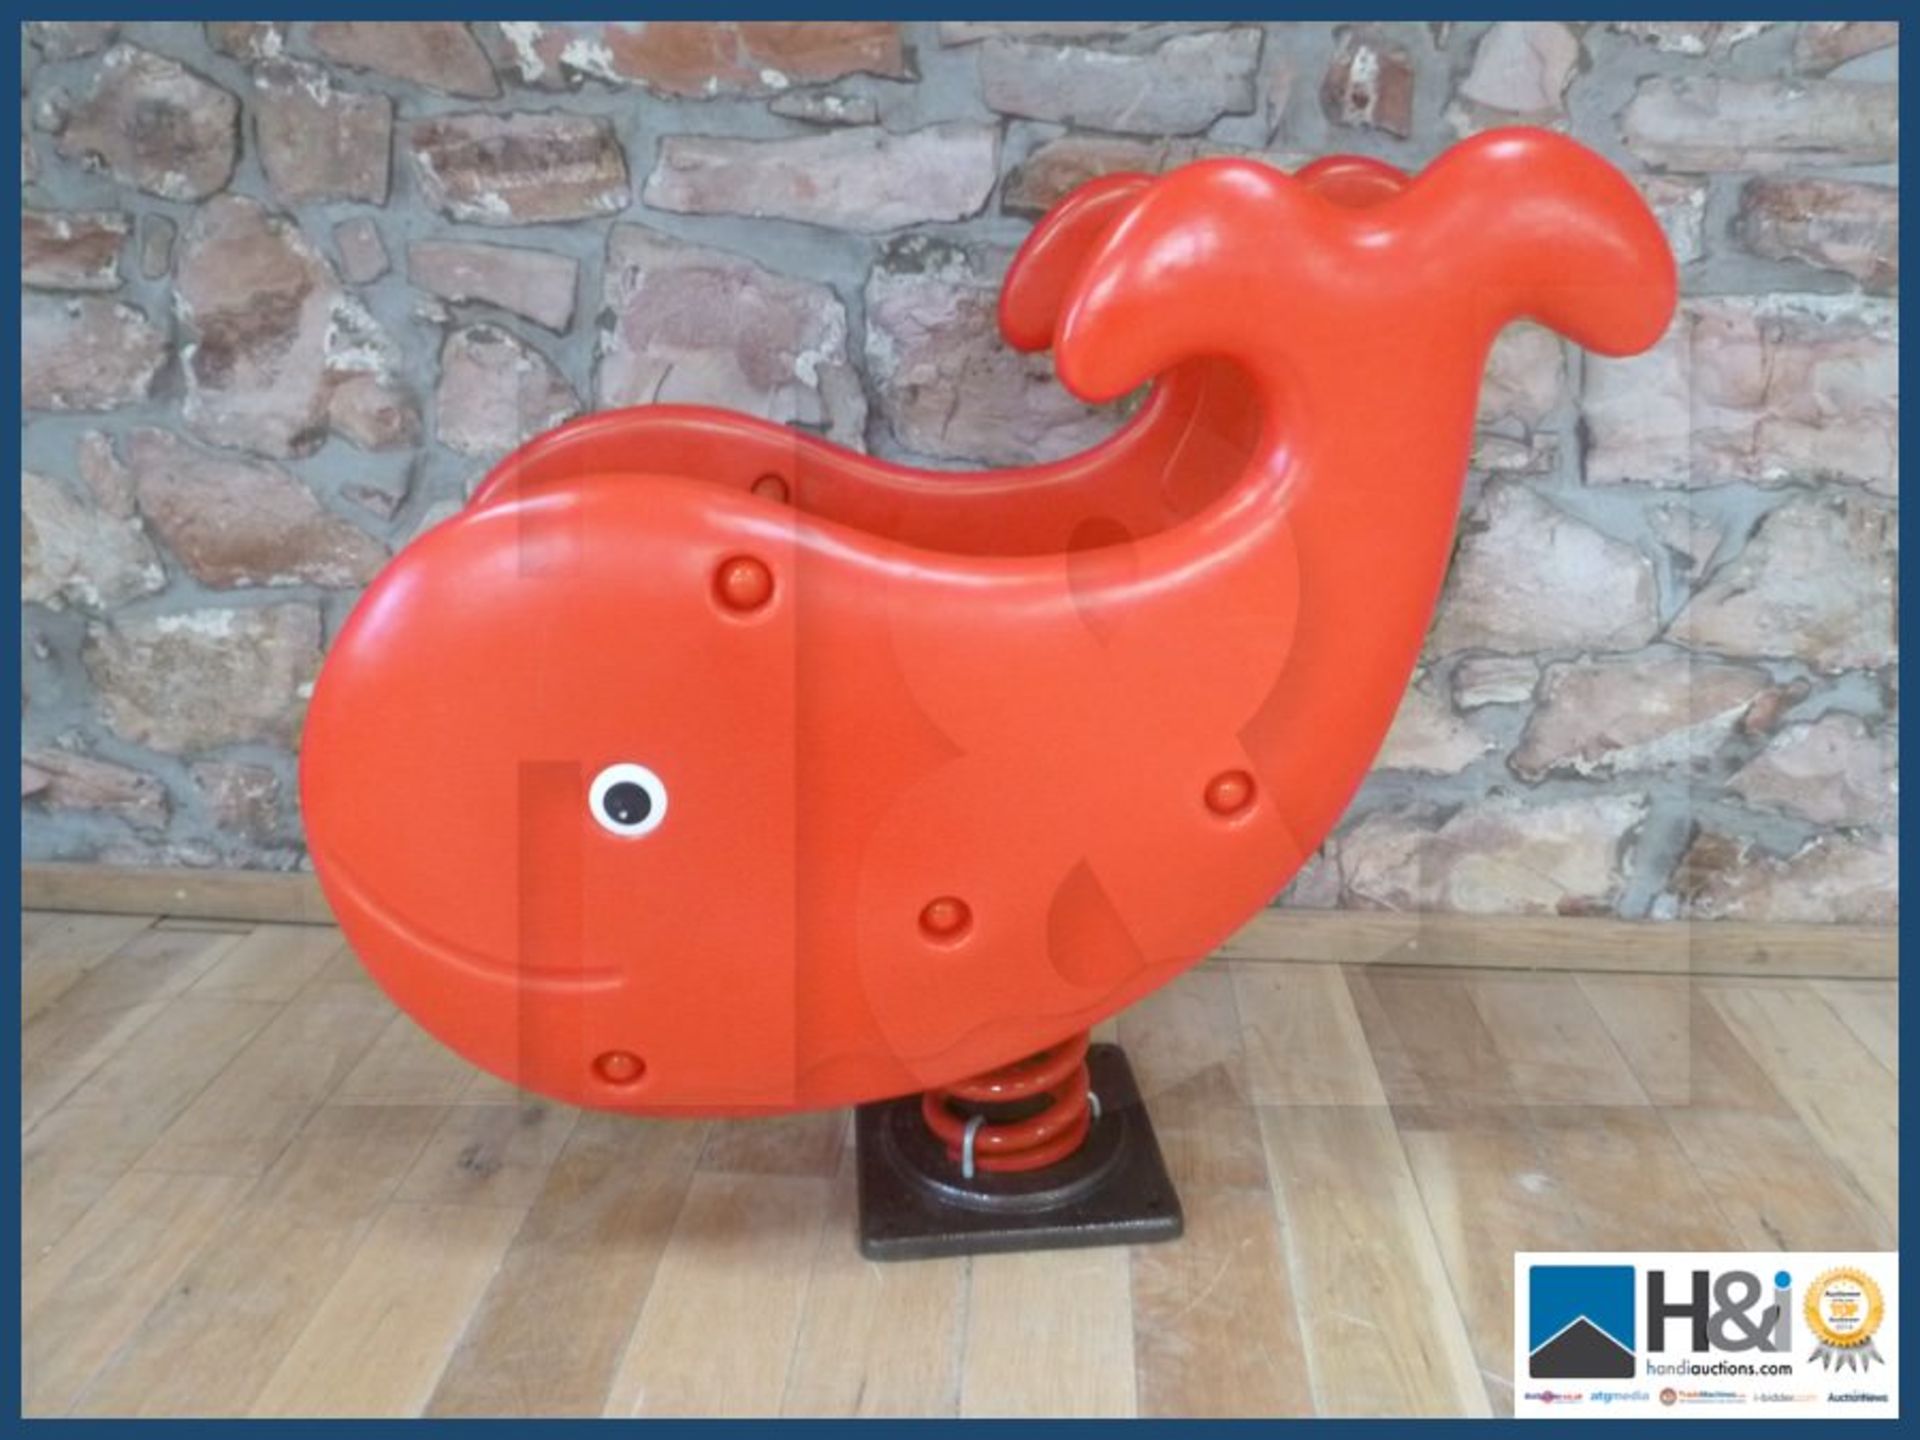 Outdoor children's playground whale spring toy solid metal and plastic construction new and unused. - Image 3 of 5